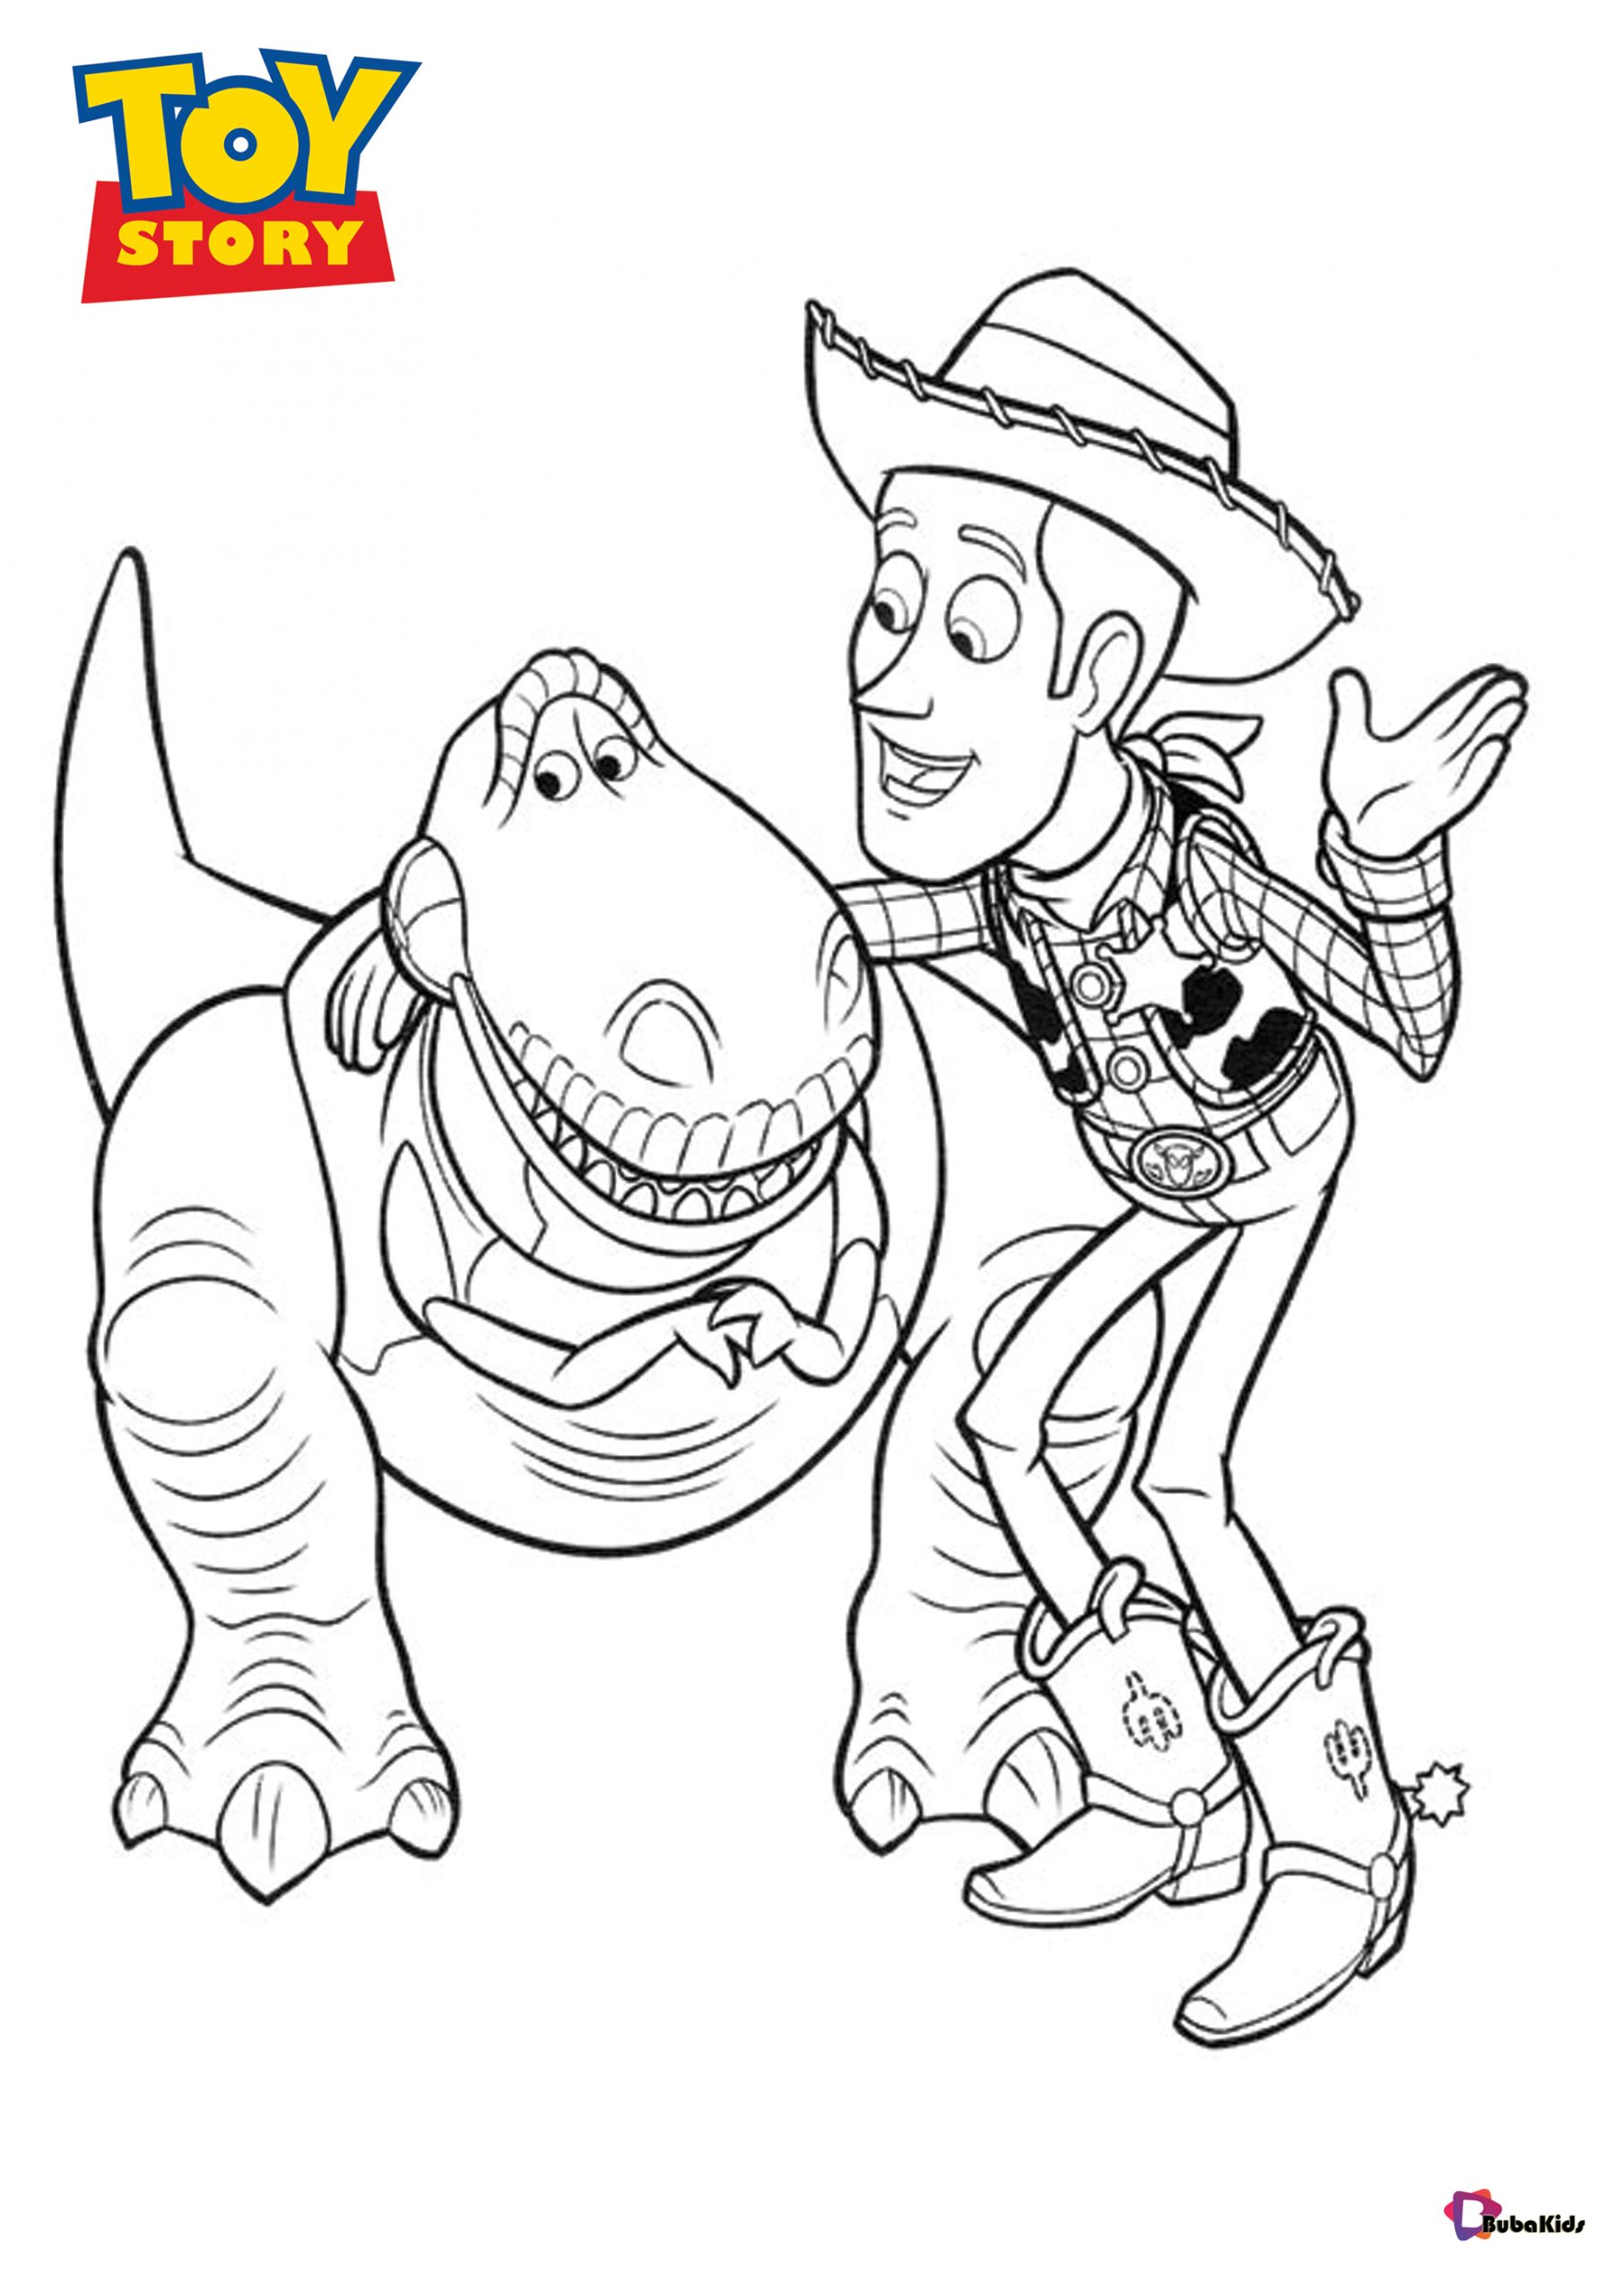 Sheriff Woody and Rex Toy Story characters coloring pages Wallpaper